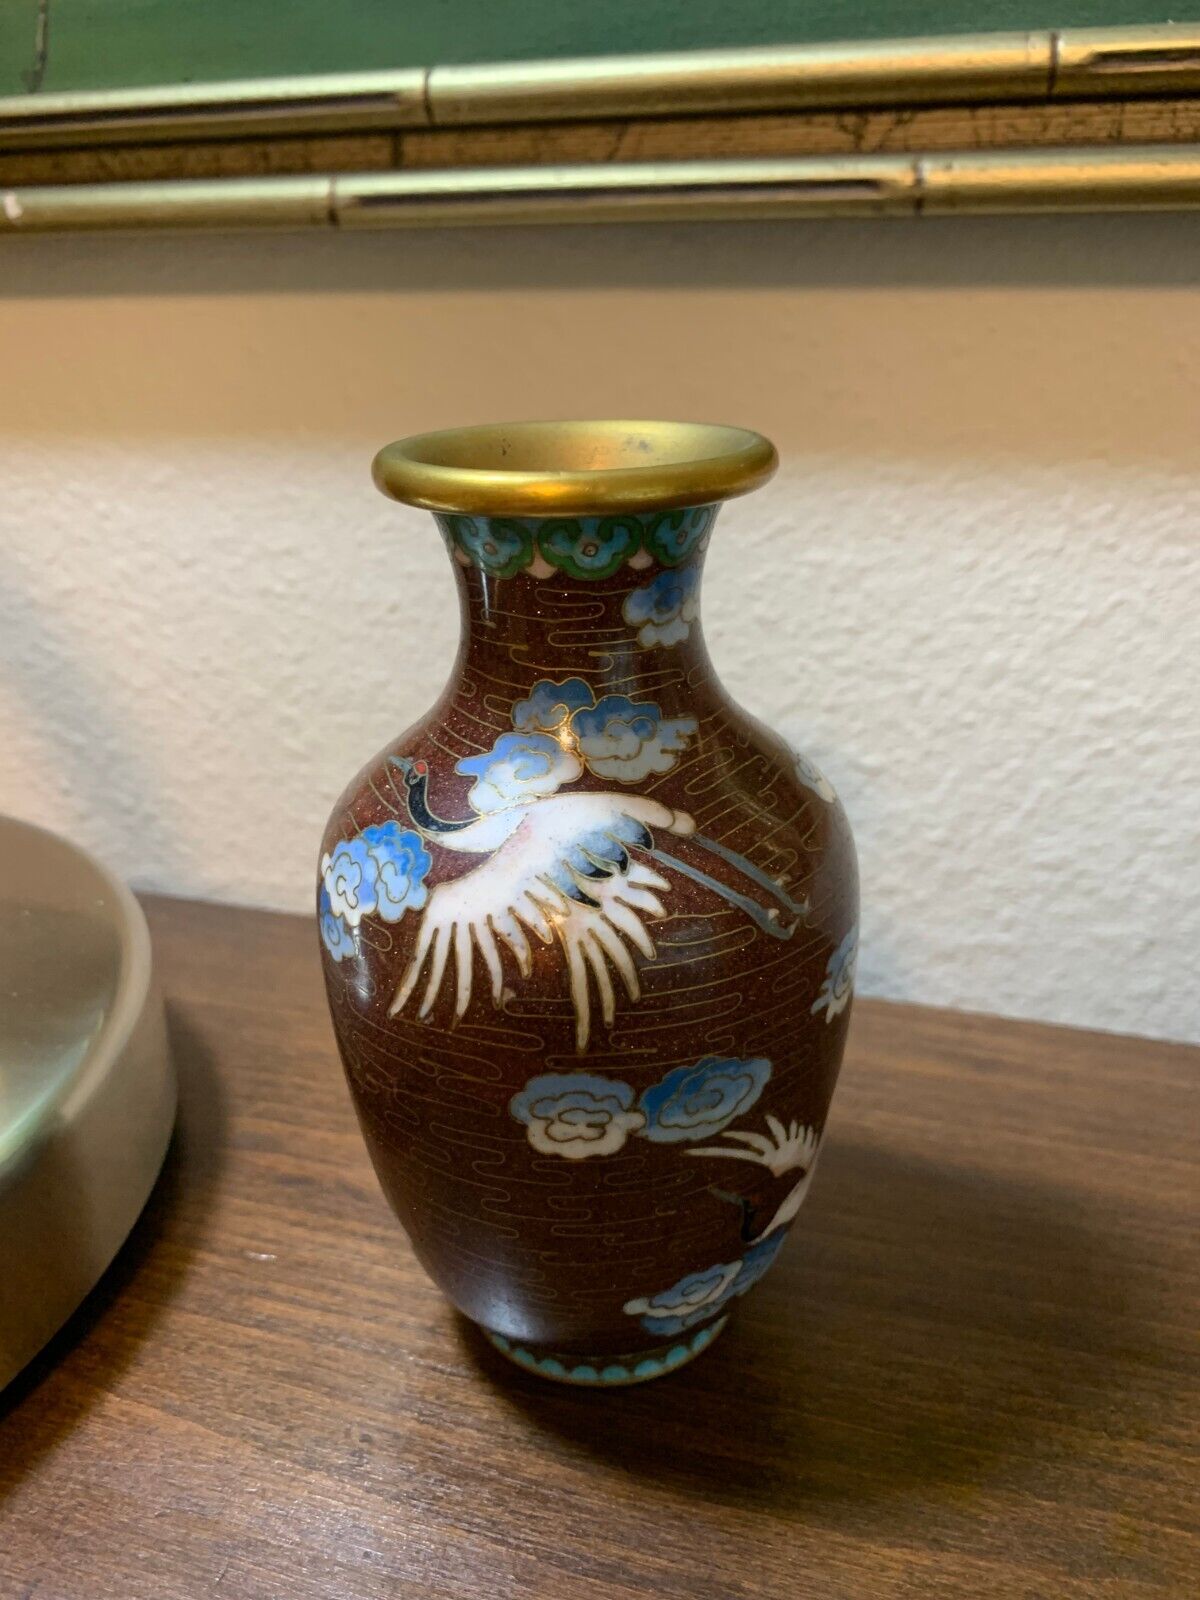 SMALL METAL ASIAN BUD VASE WITH BIRDS